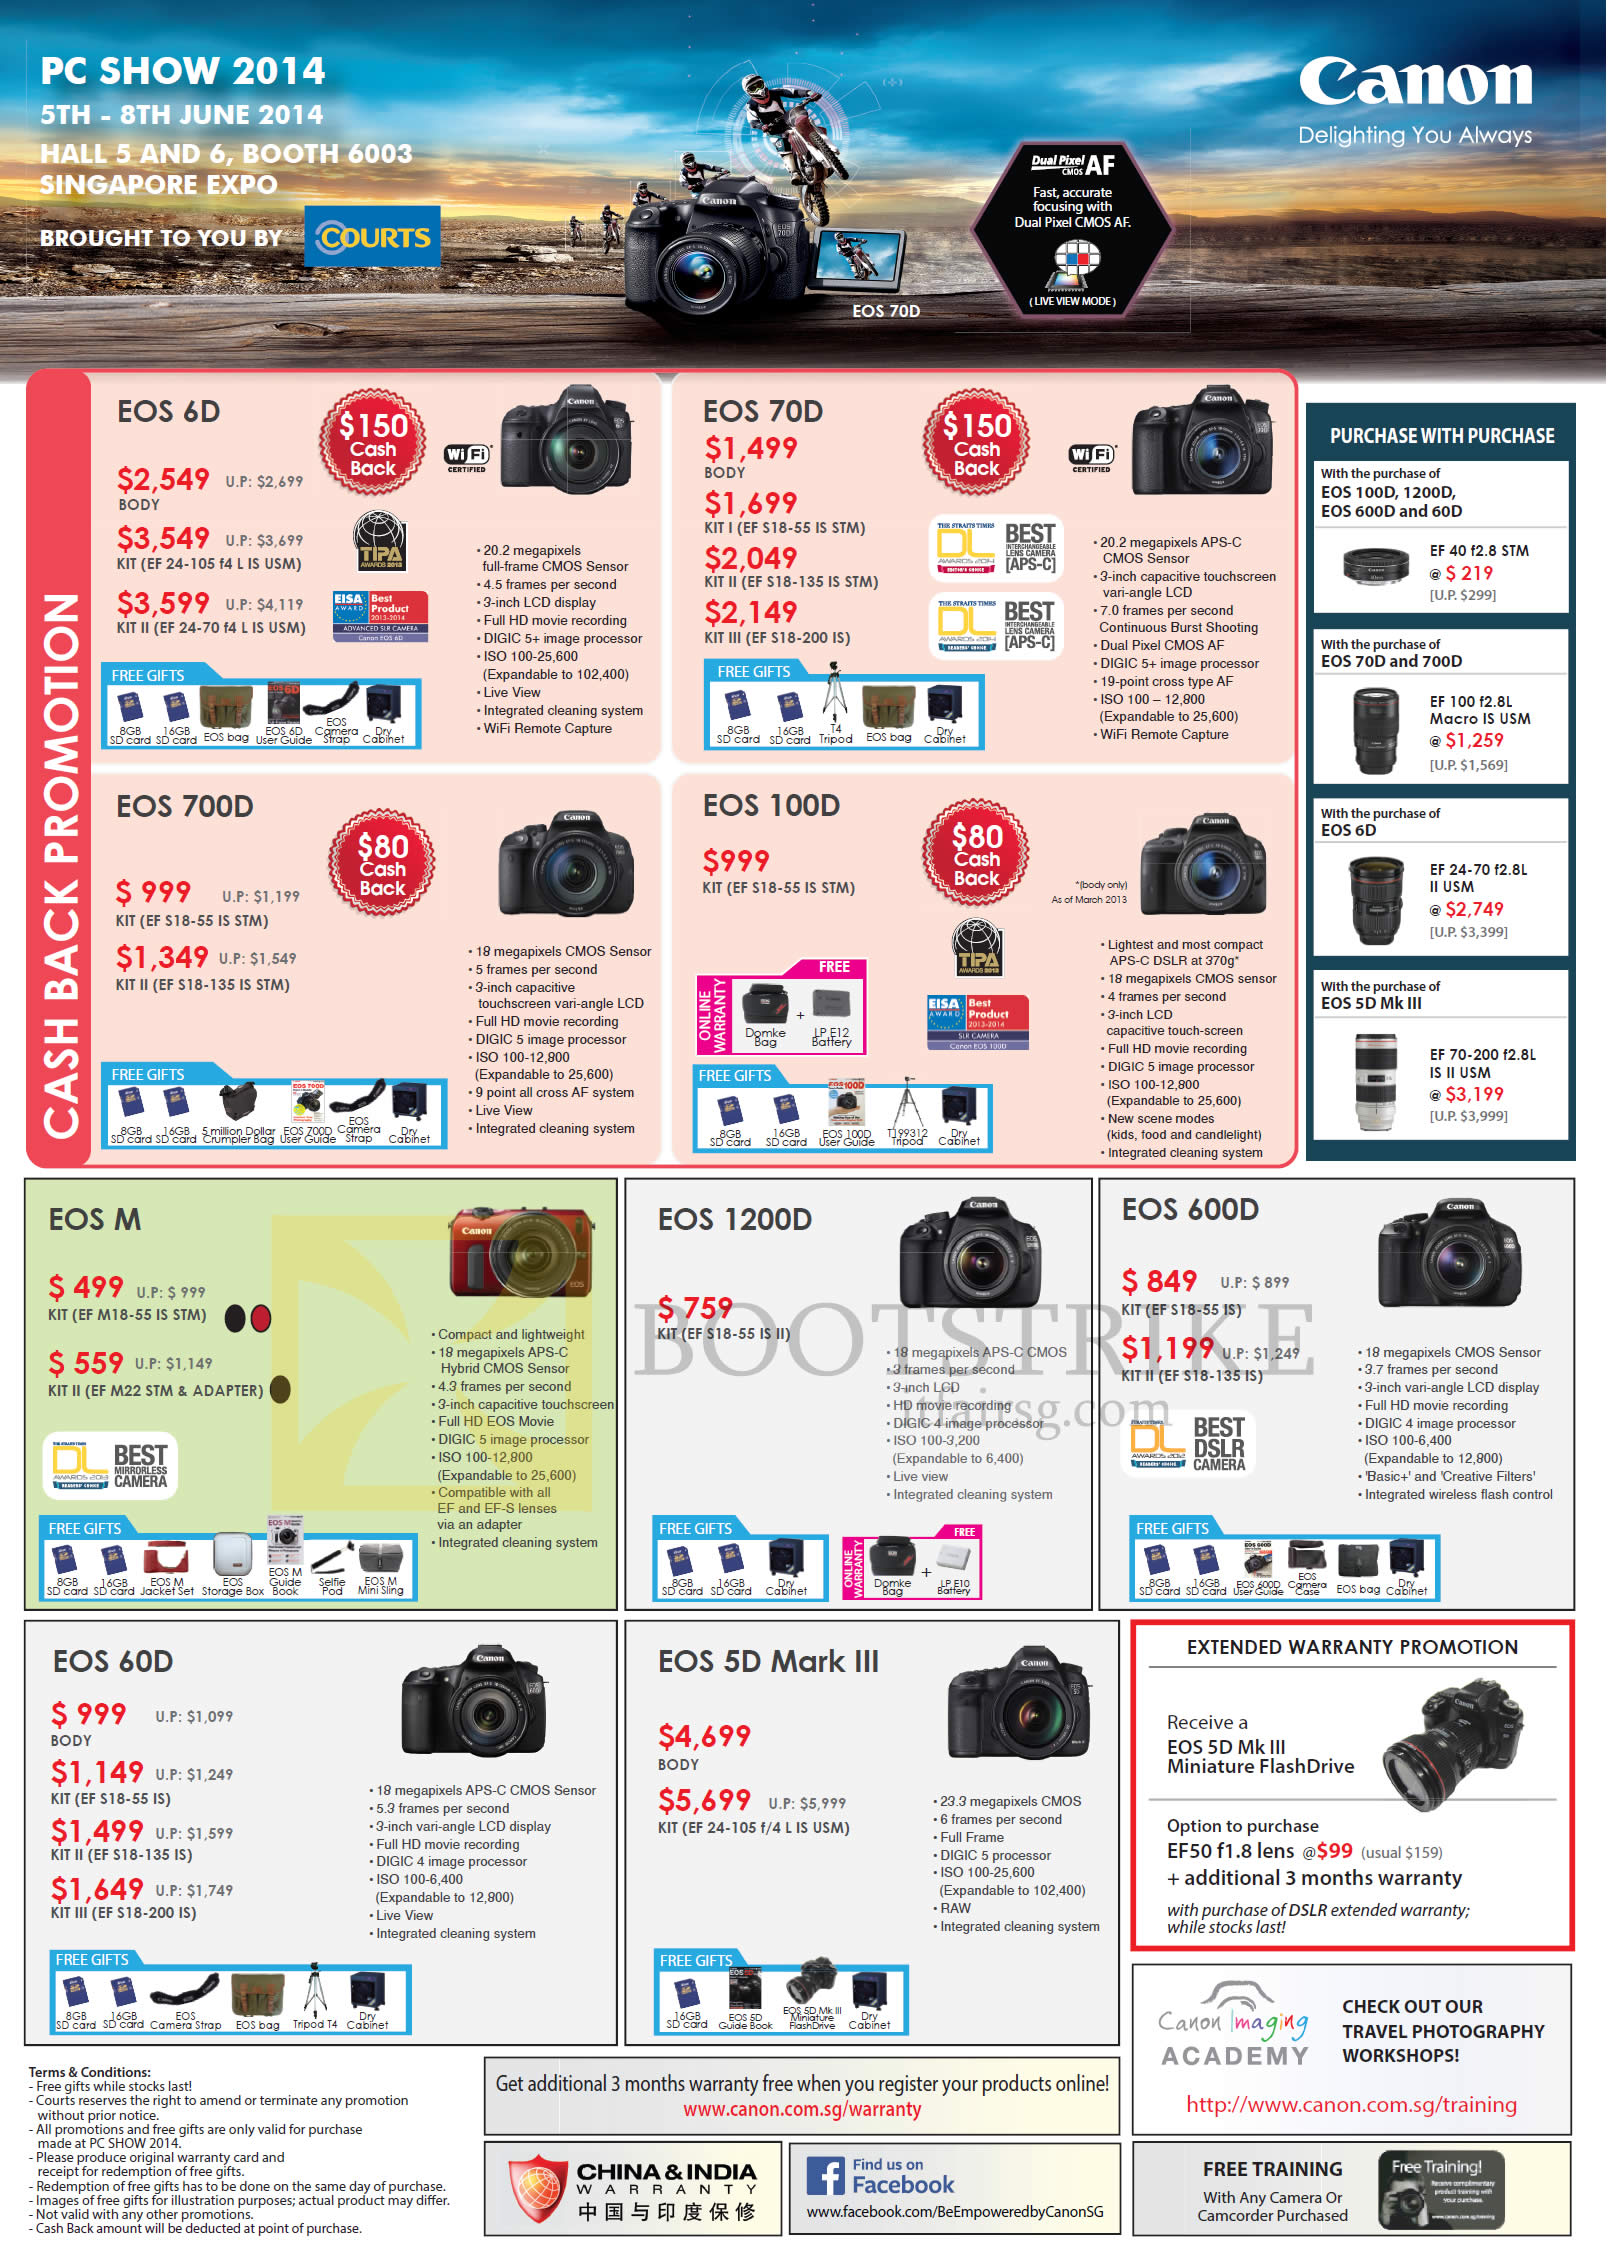 PC SHOW 2014 price list image brochure of Canon Digital Cameras DSLR EOS 6D, 70D, 700D, 100D, M, 1200D, 600D, 60D, 5D Mark III